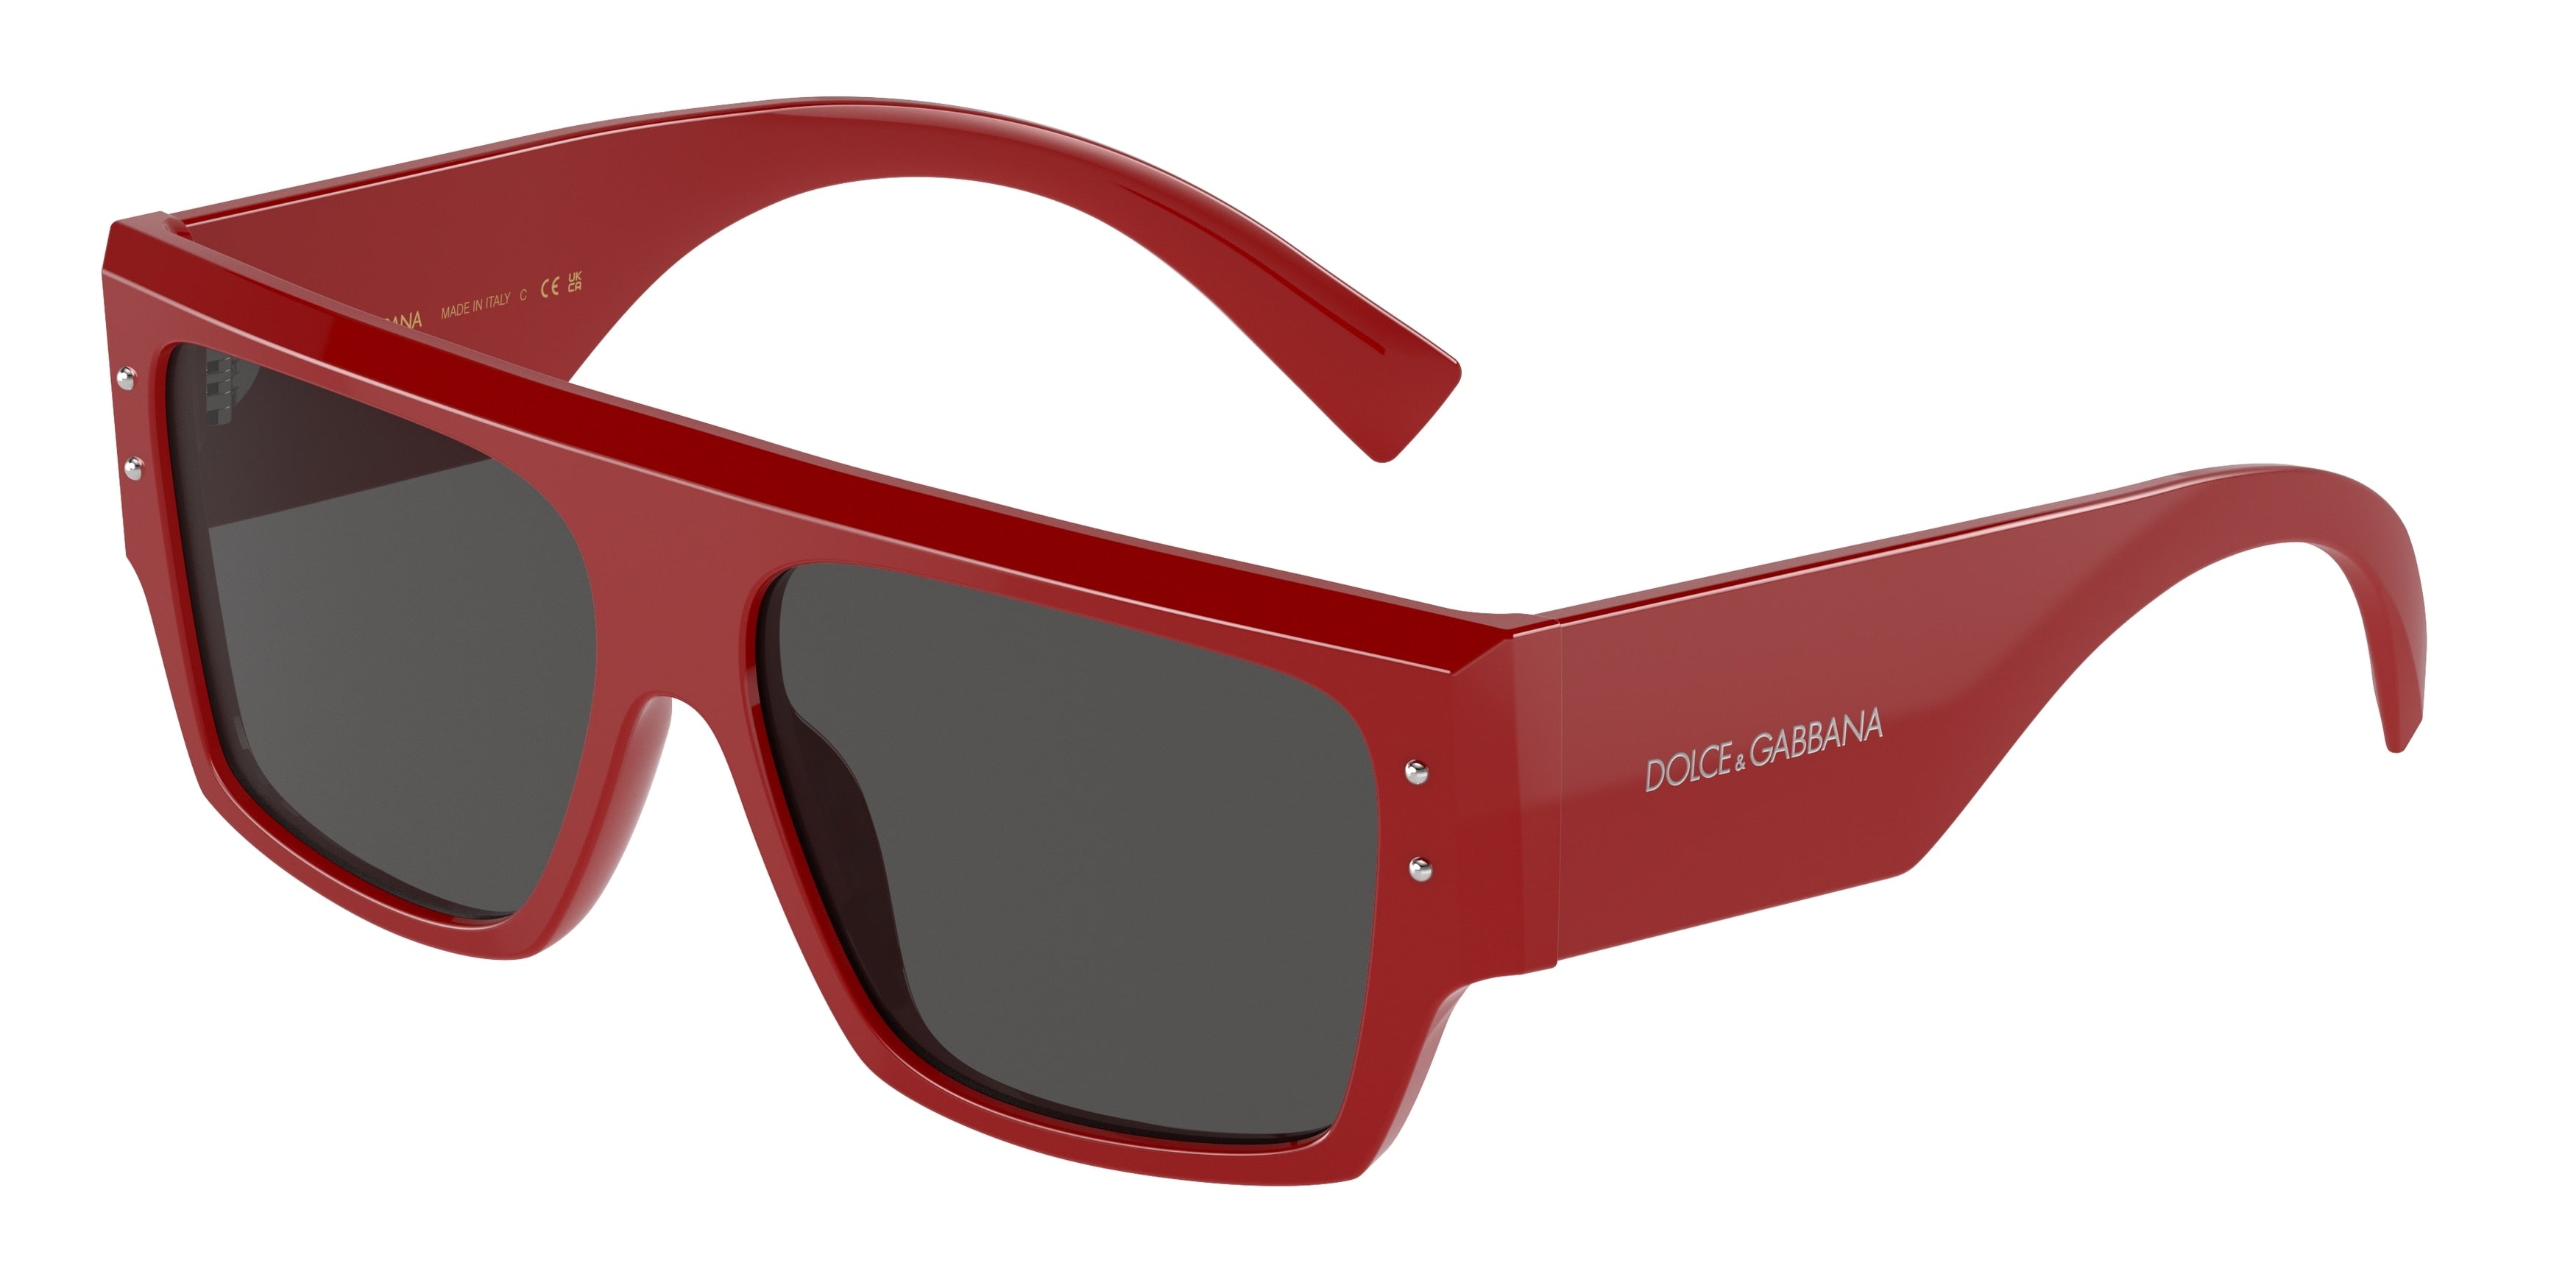 DOLCE & GABBANA DG4459 Square Sunglasses  309687-Red 56-145-14 - Color Map Red